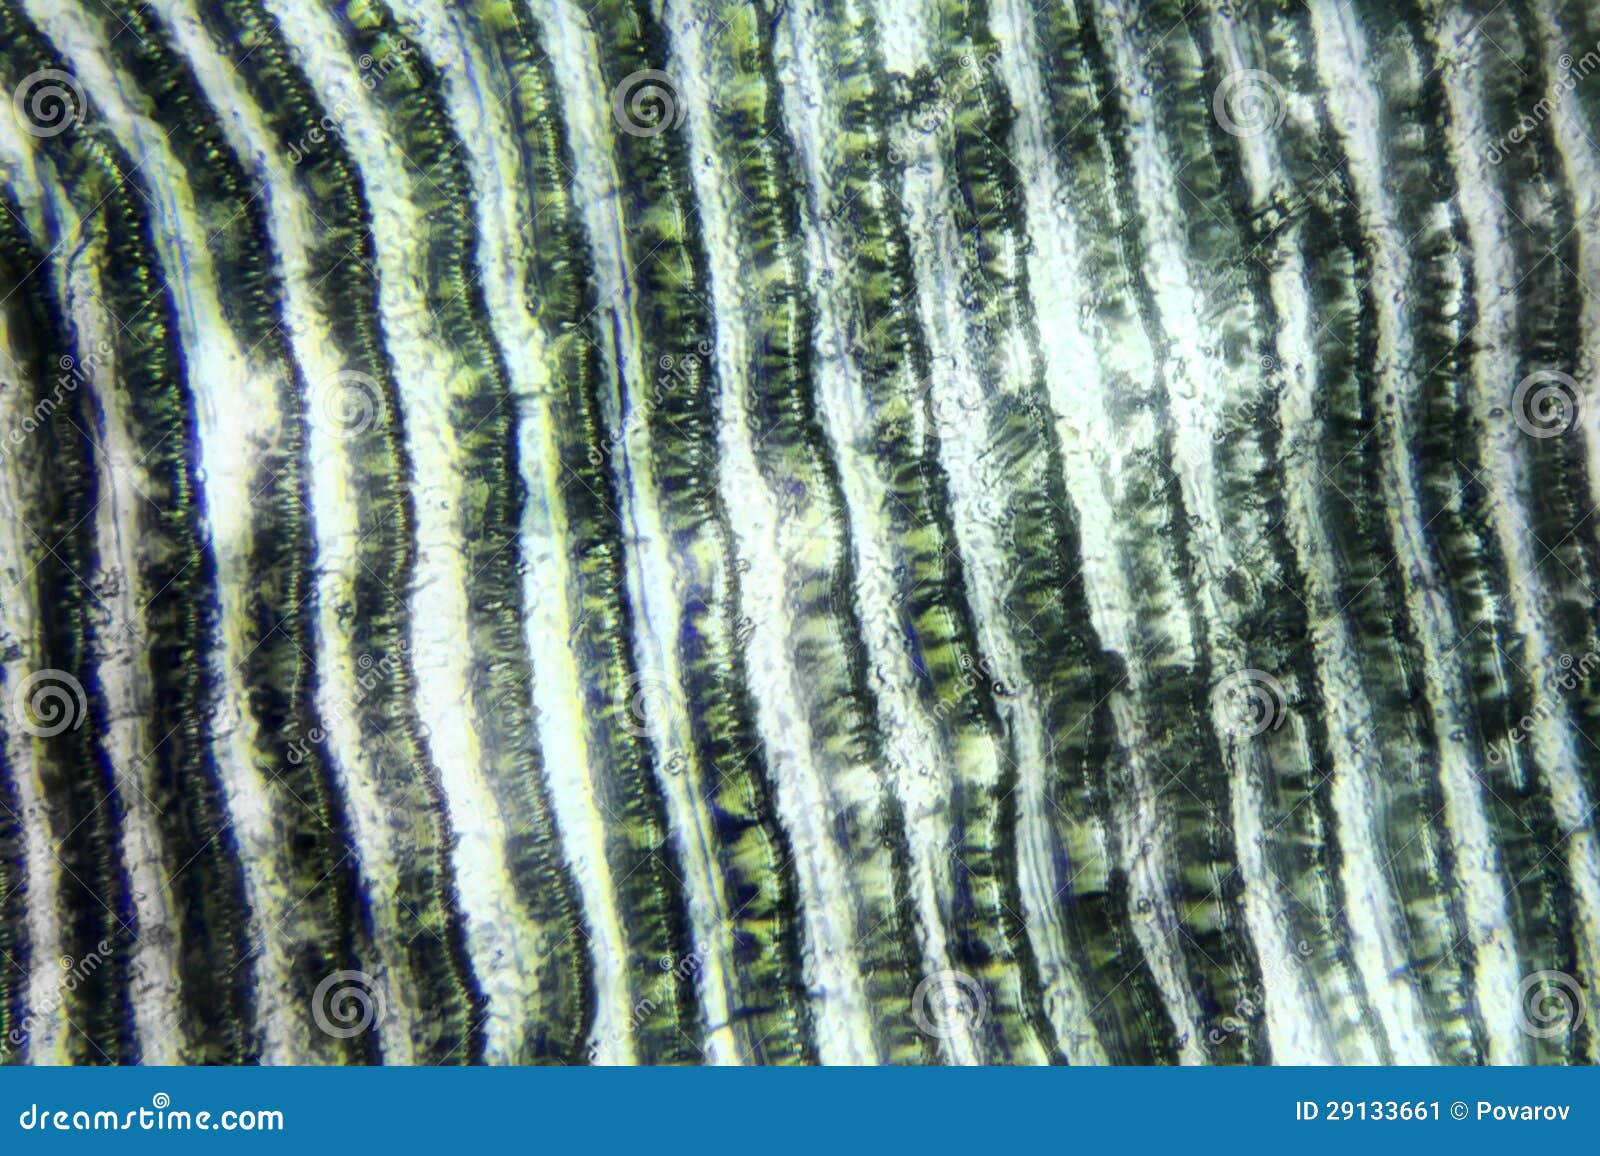 Fish Scales Under the Microscope Stock Image - Image of fishery, flow:  29133661